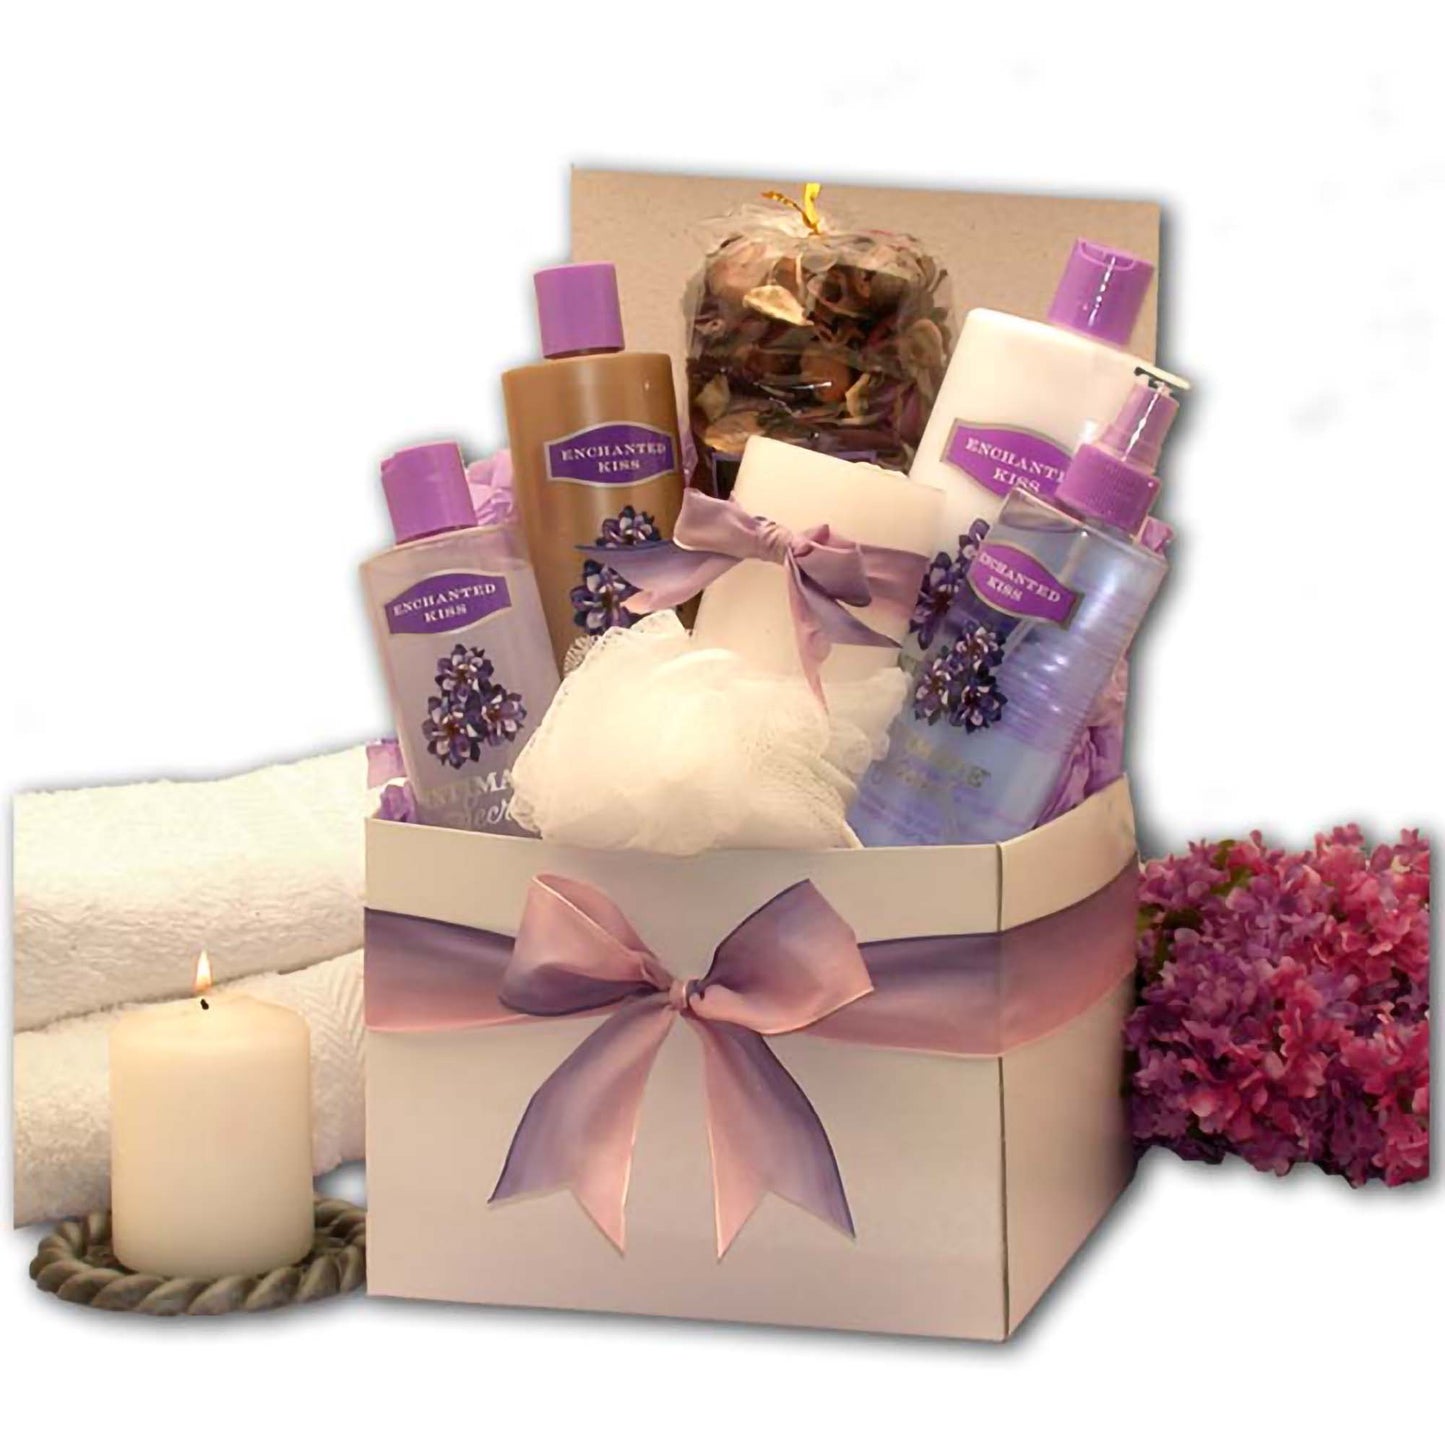 Relaxation Aromatherapy Spa Care Package